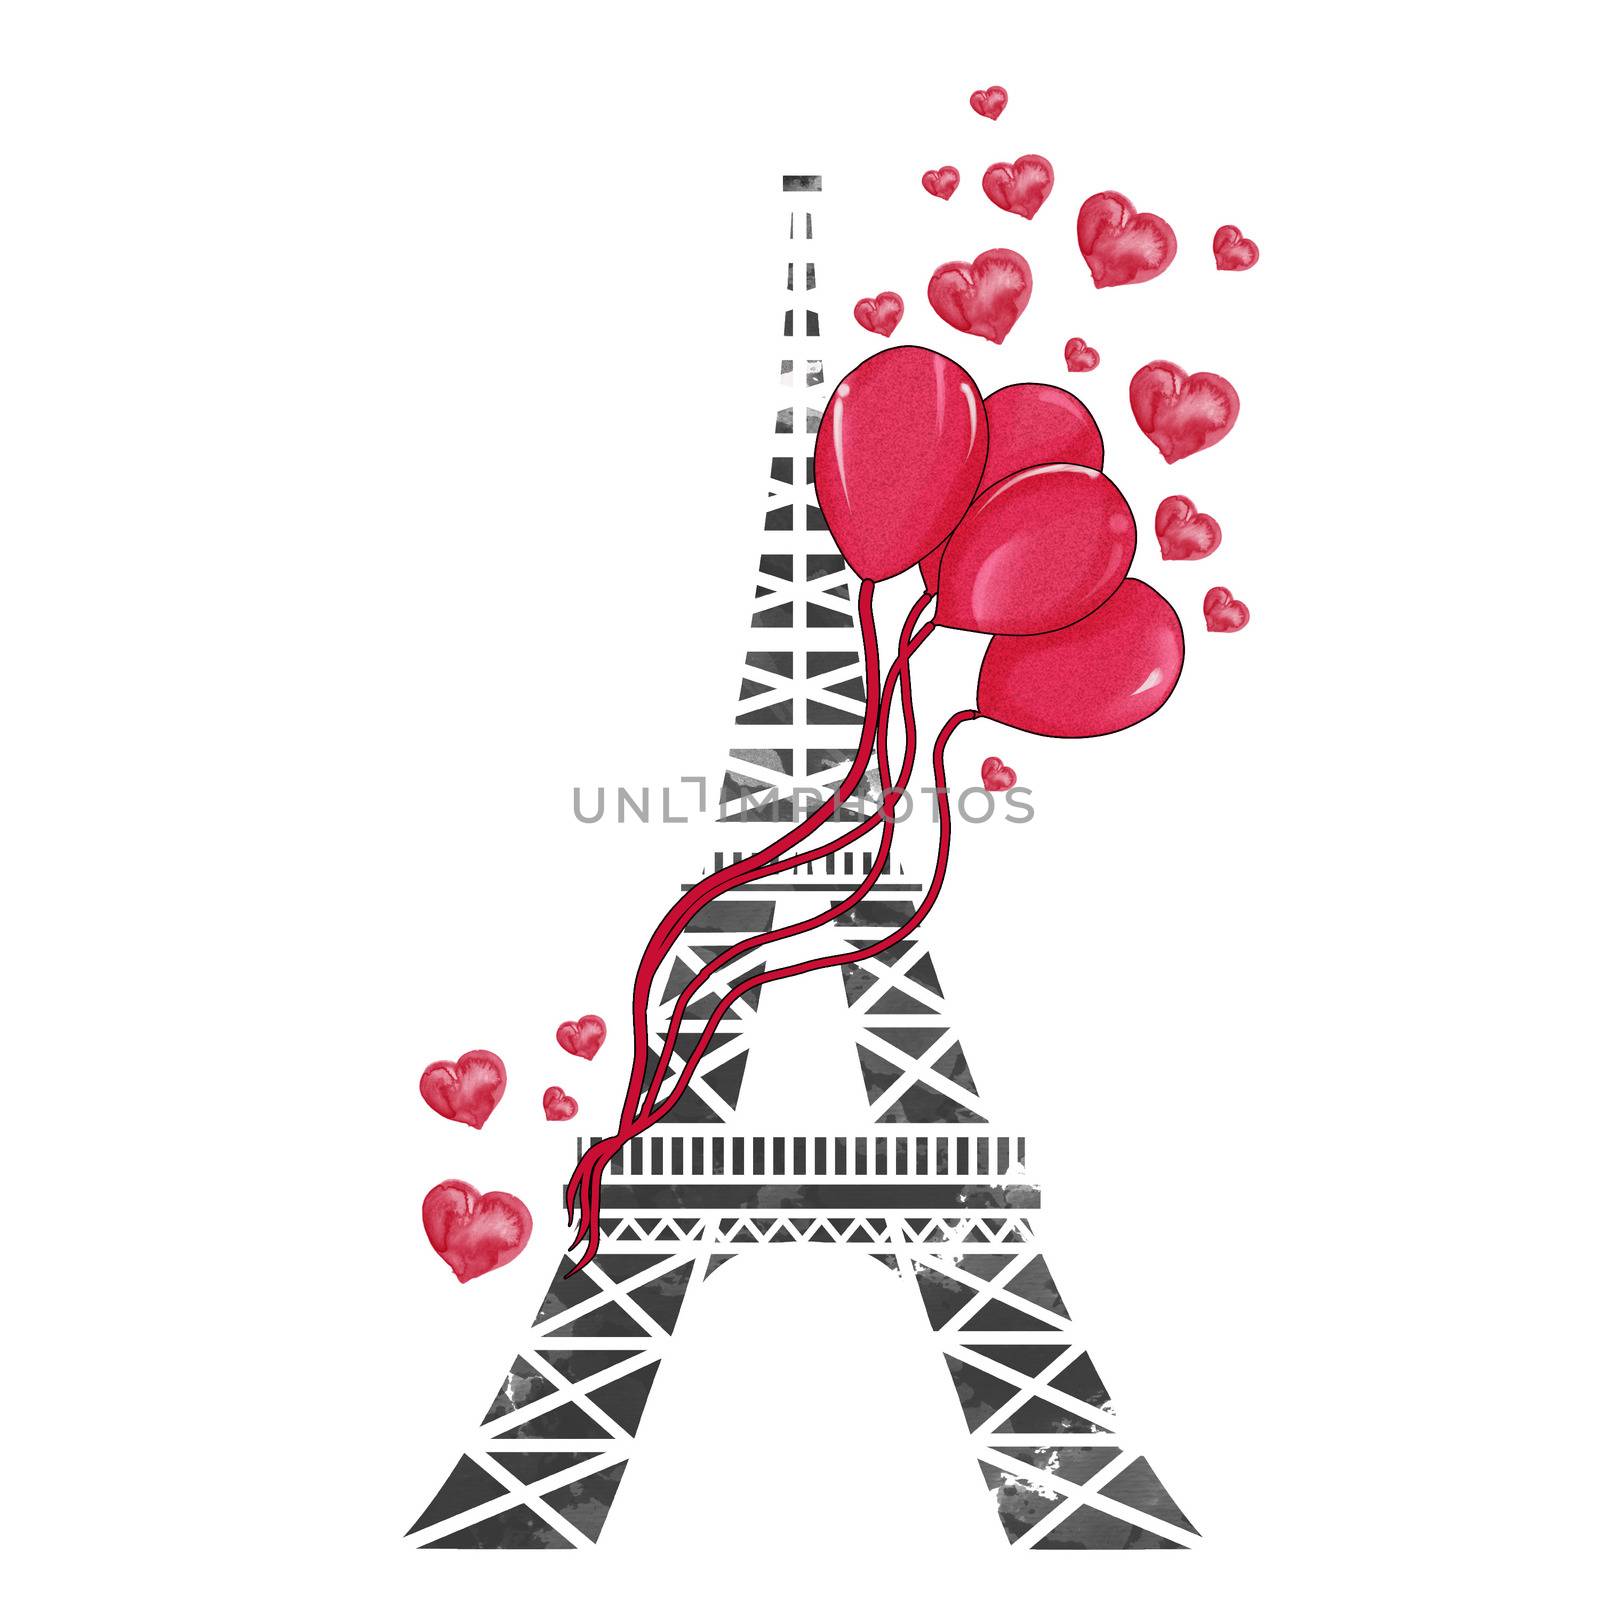 watercolor hand drawn illustration - Eiffel tower with ballons and hearts